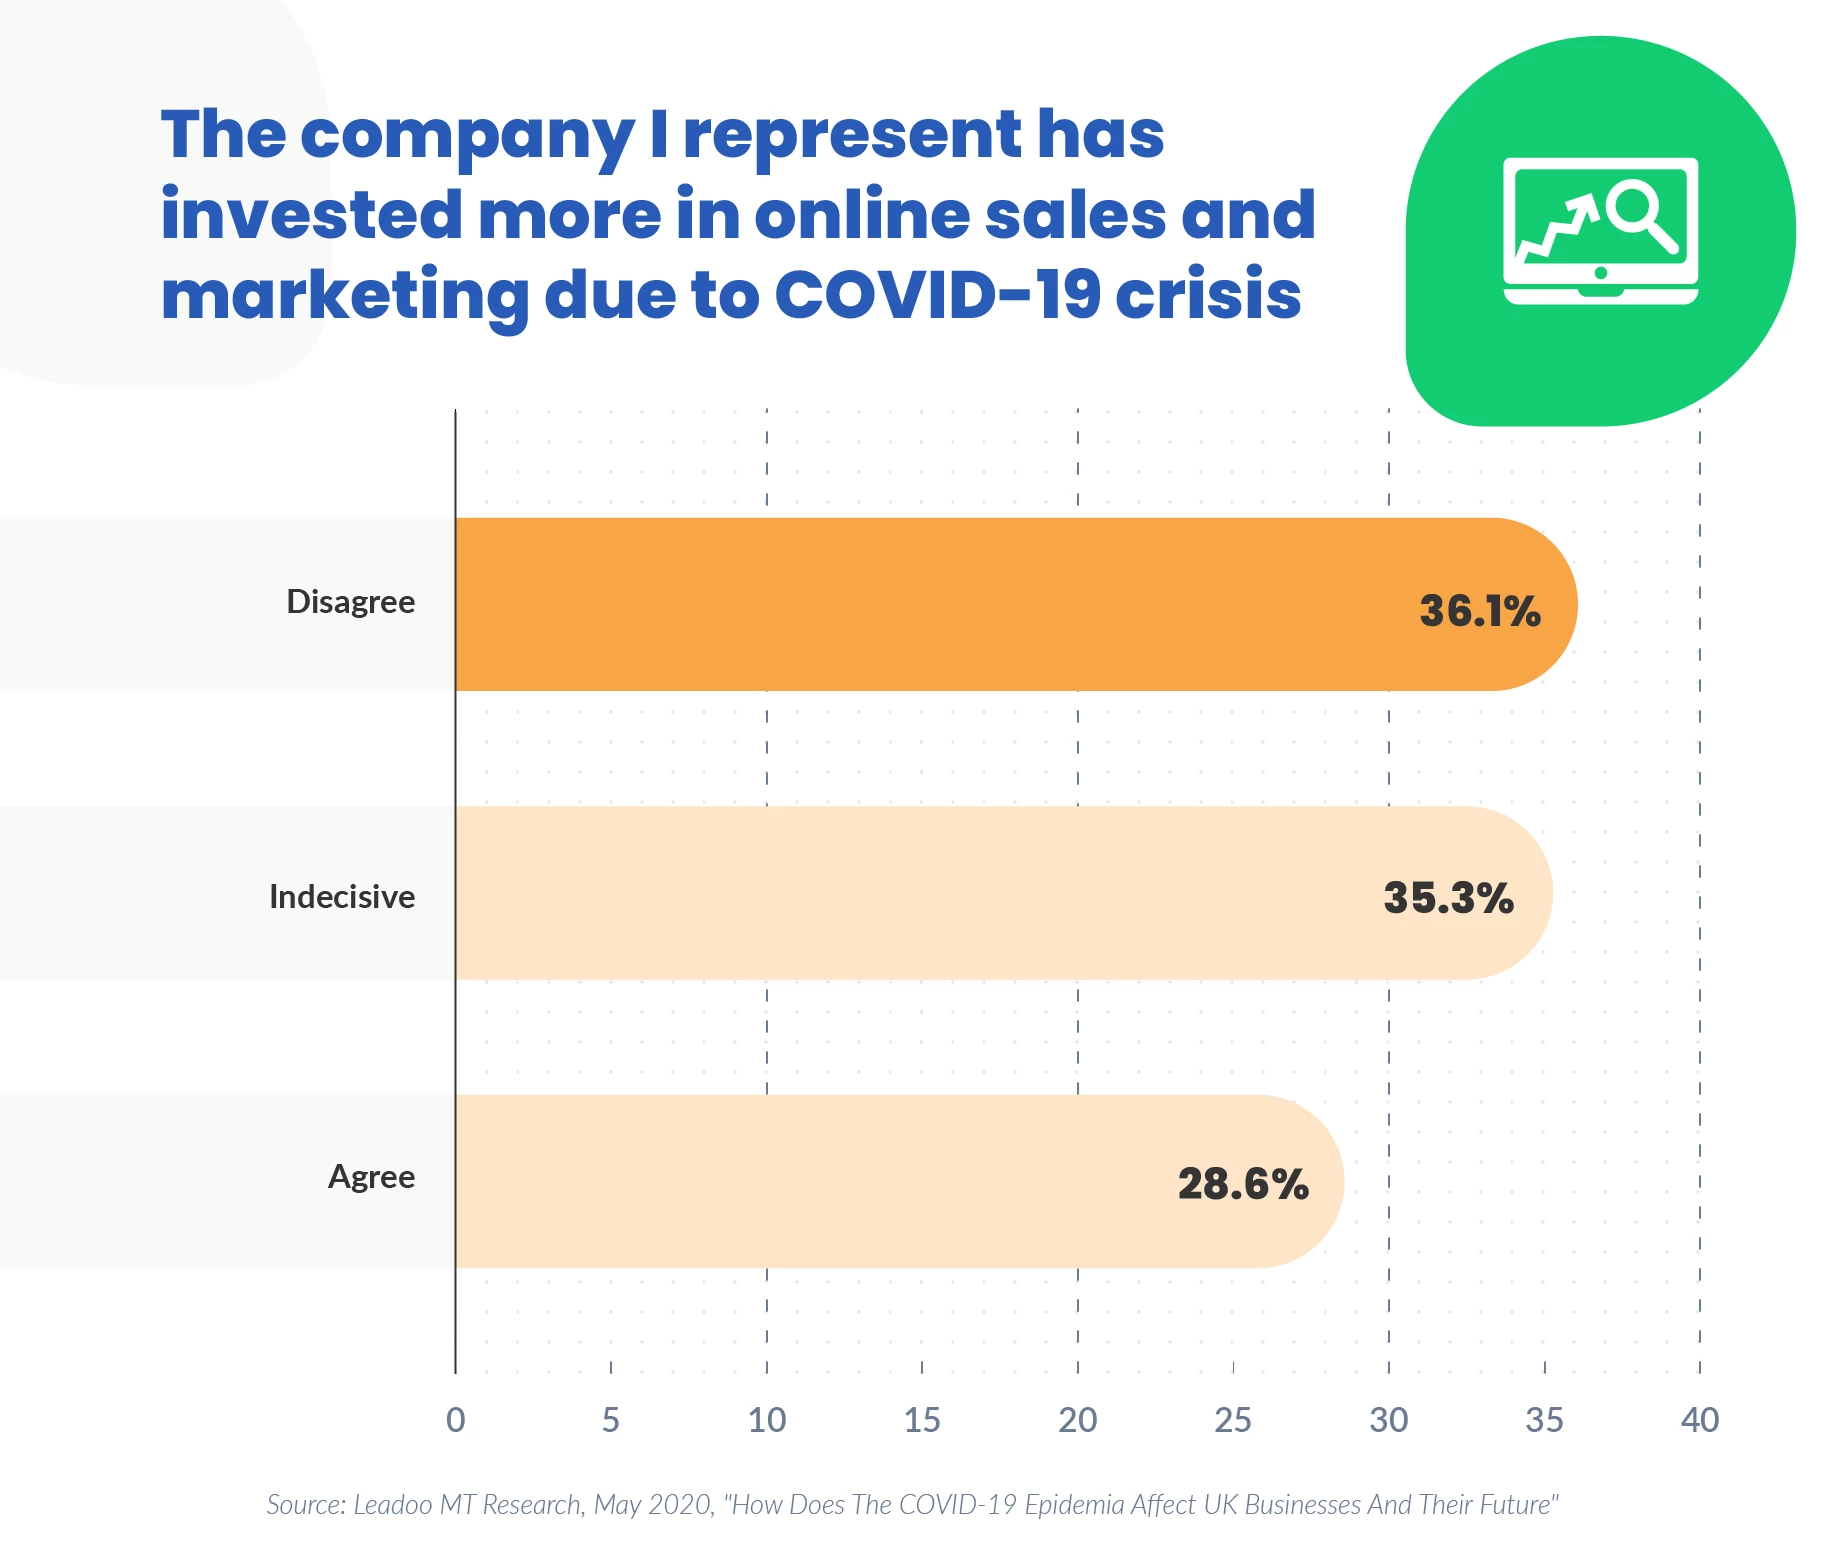 The company I represent had invested more in online marketing during COVID